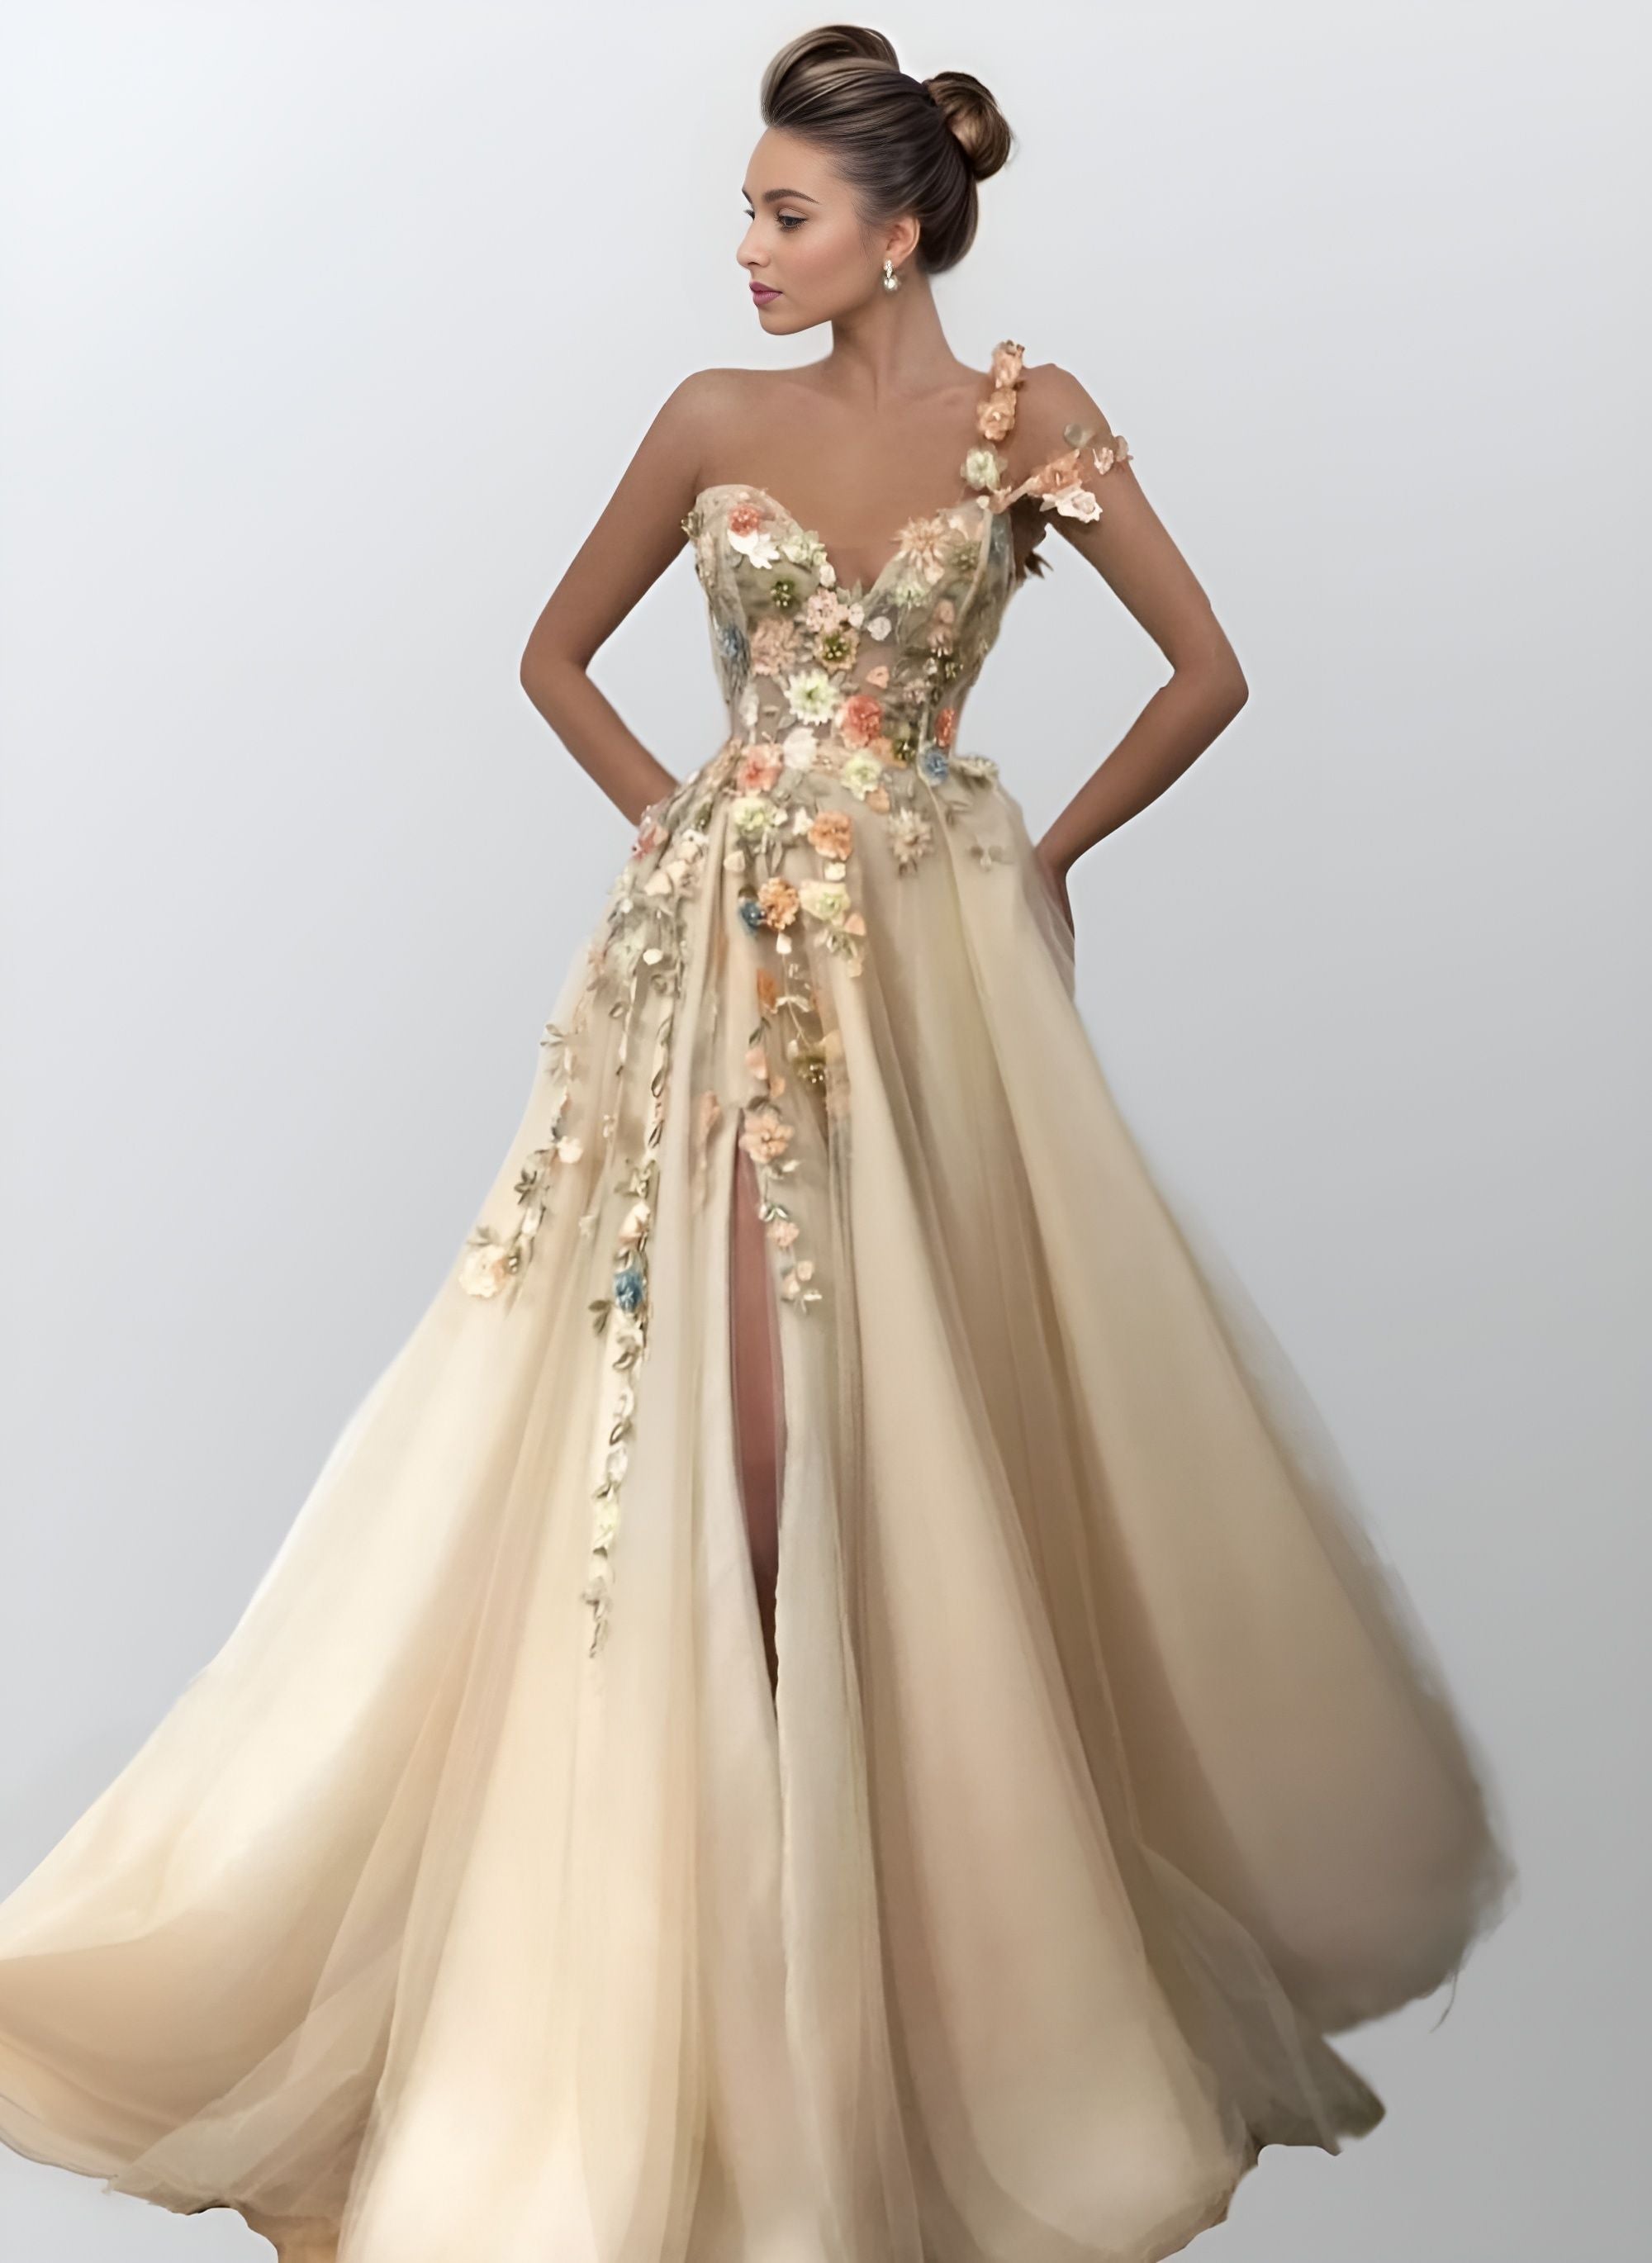 2022 wedding dress ball gowns for| Alibaba.com